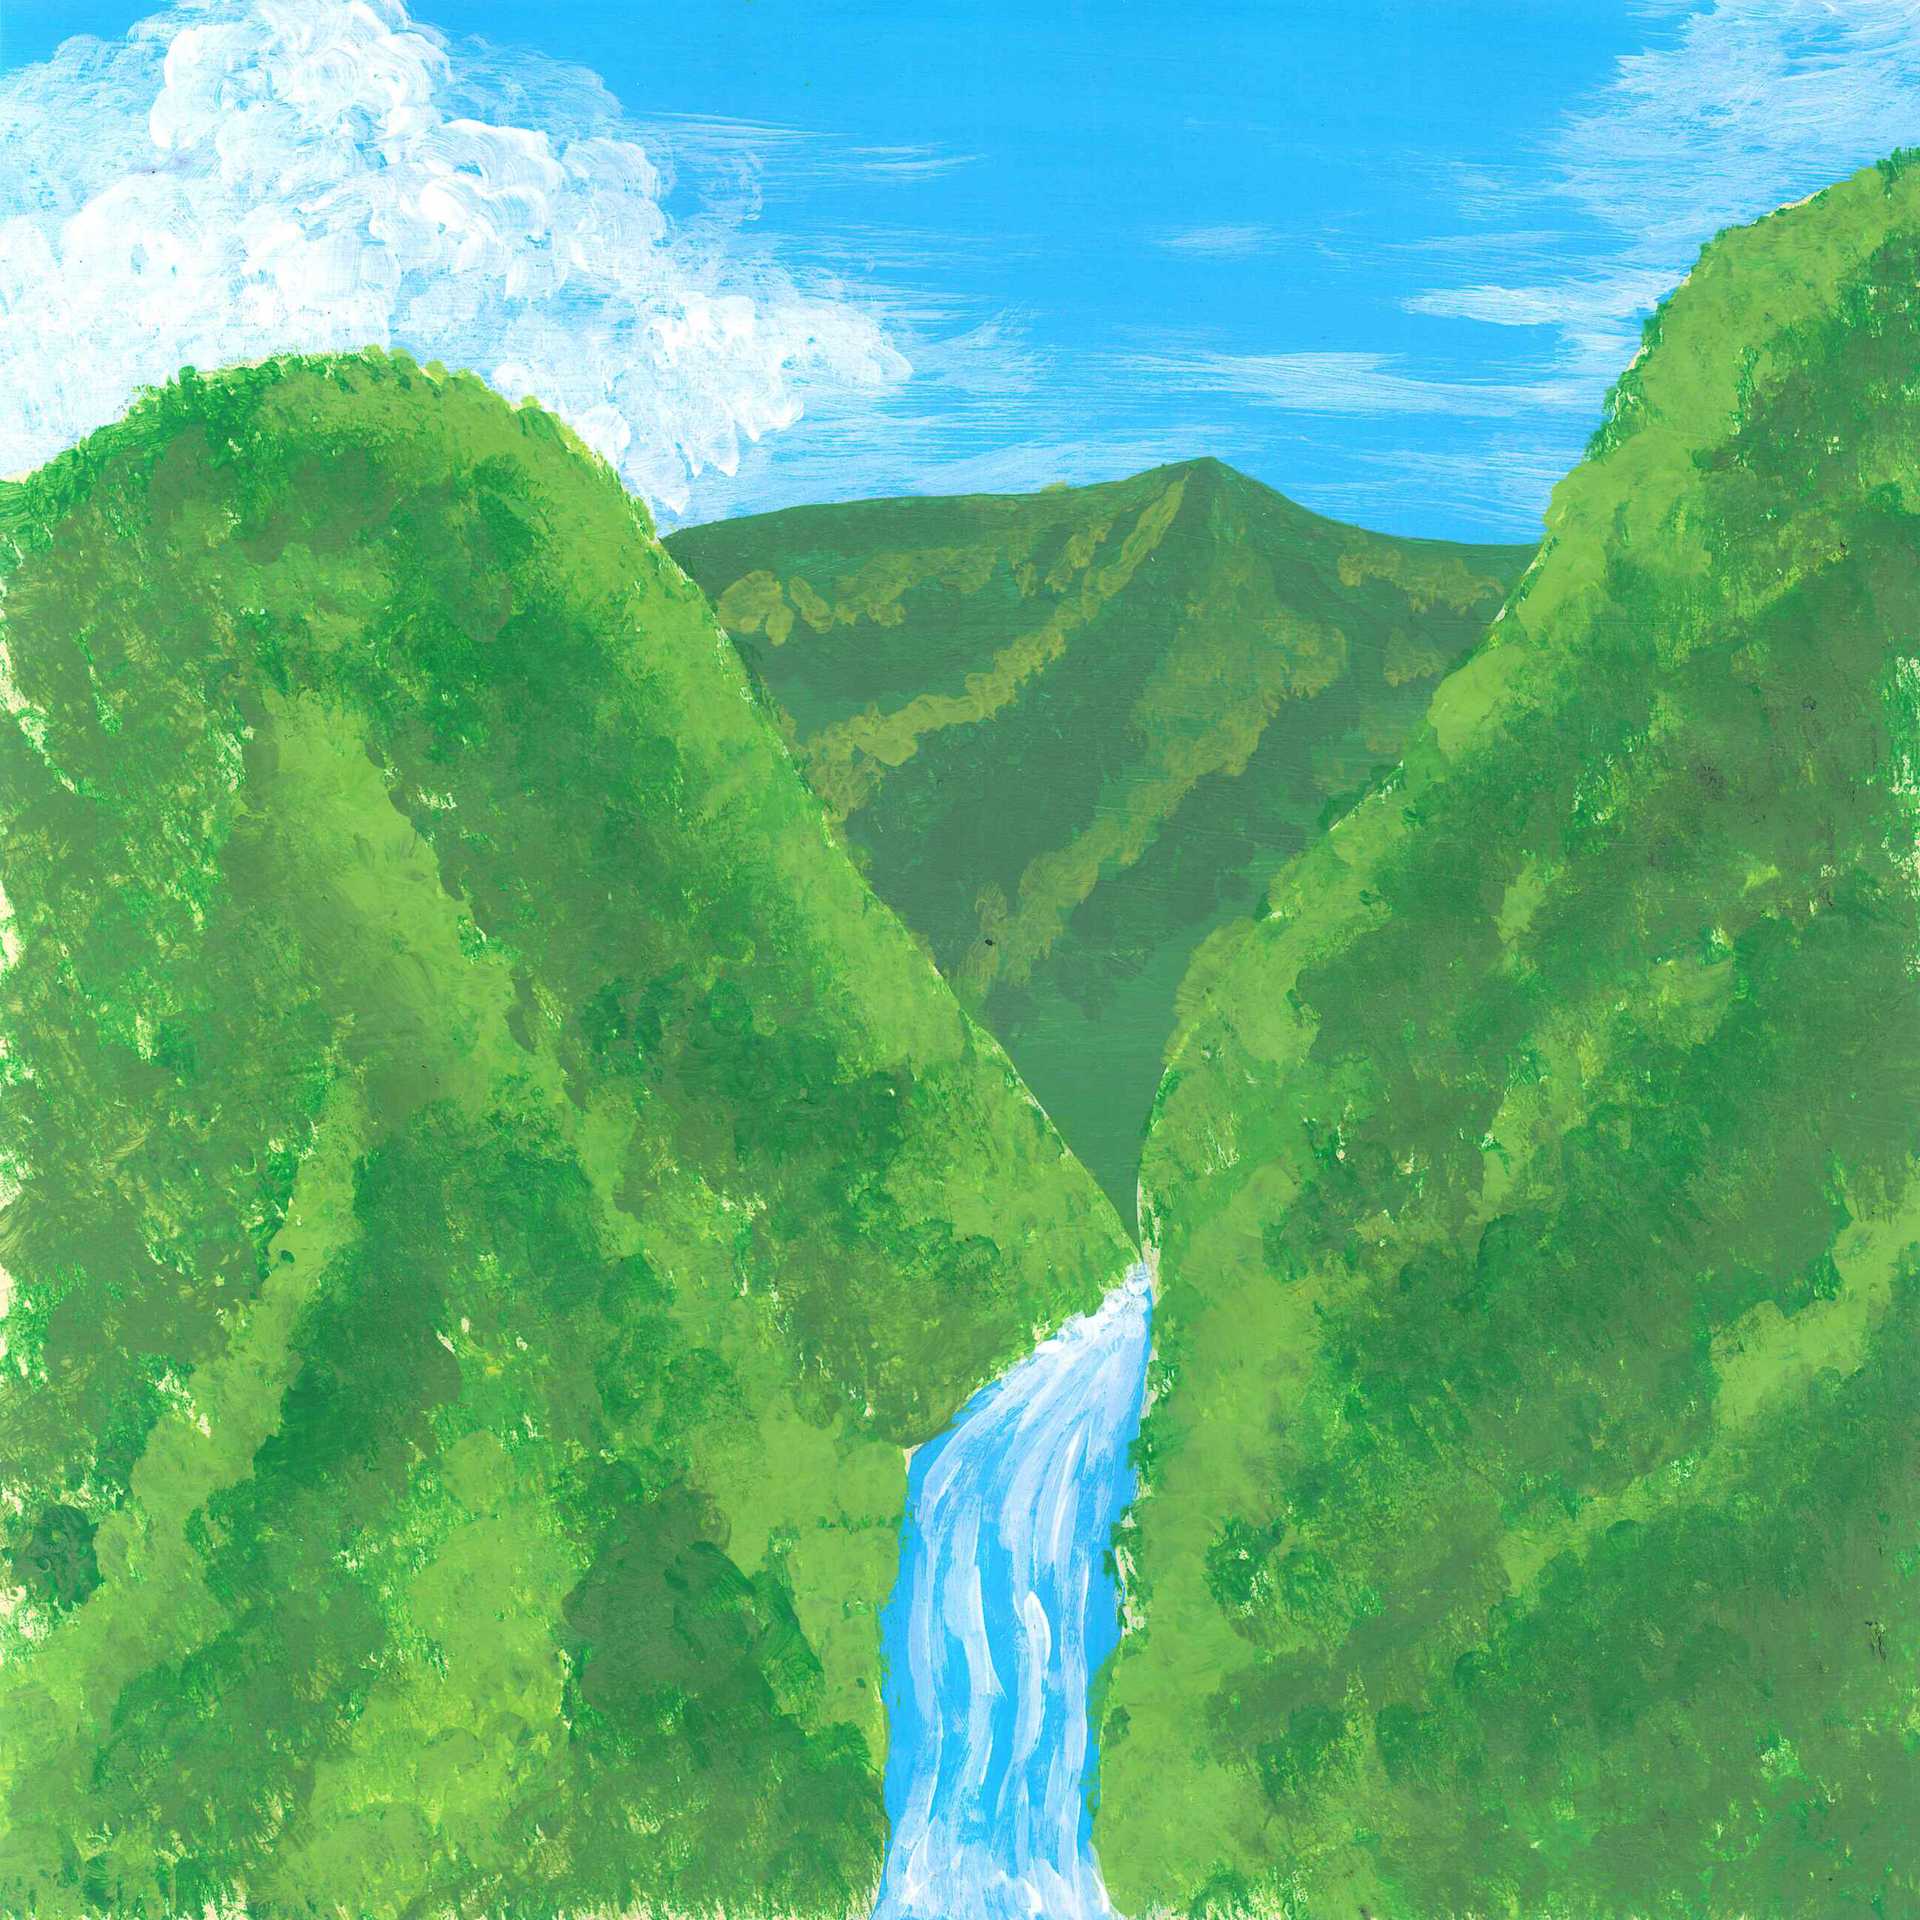 Water Flow in the Gariwang Mountain Moss Valley - nature landscape painting - earth.fm